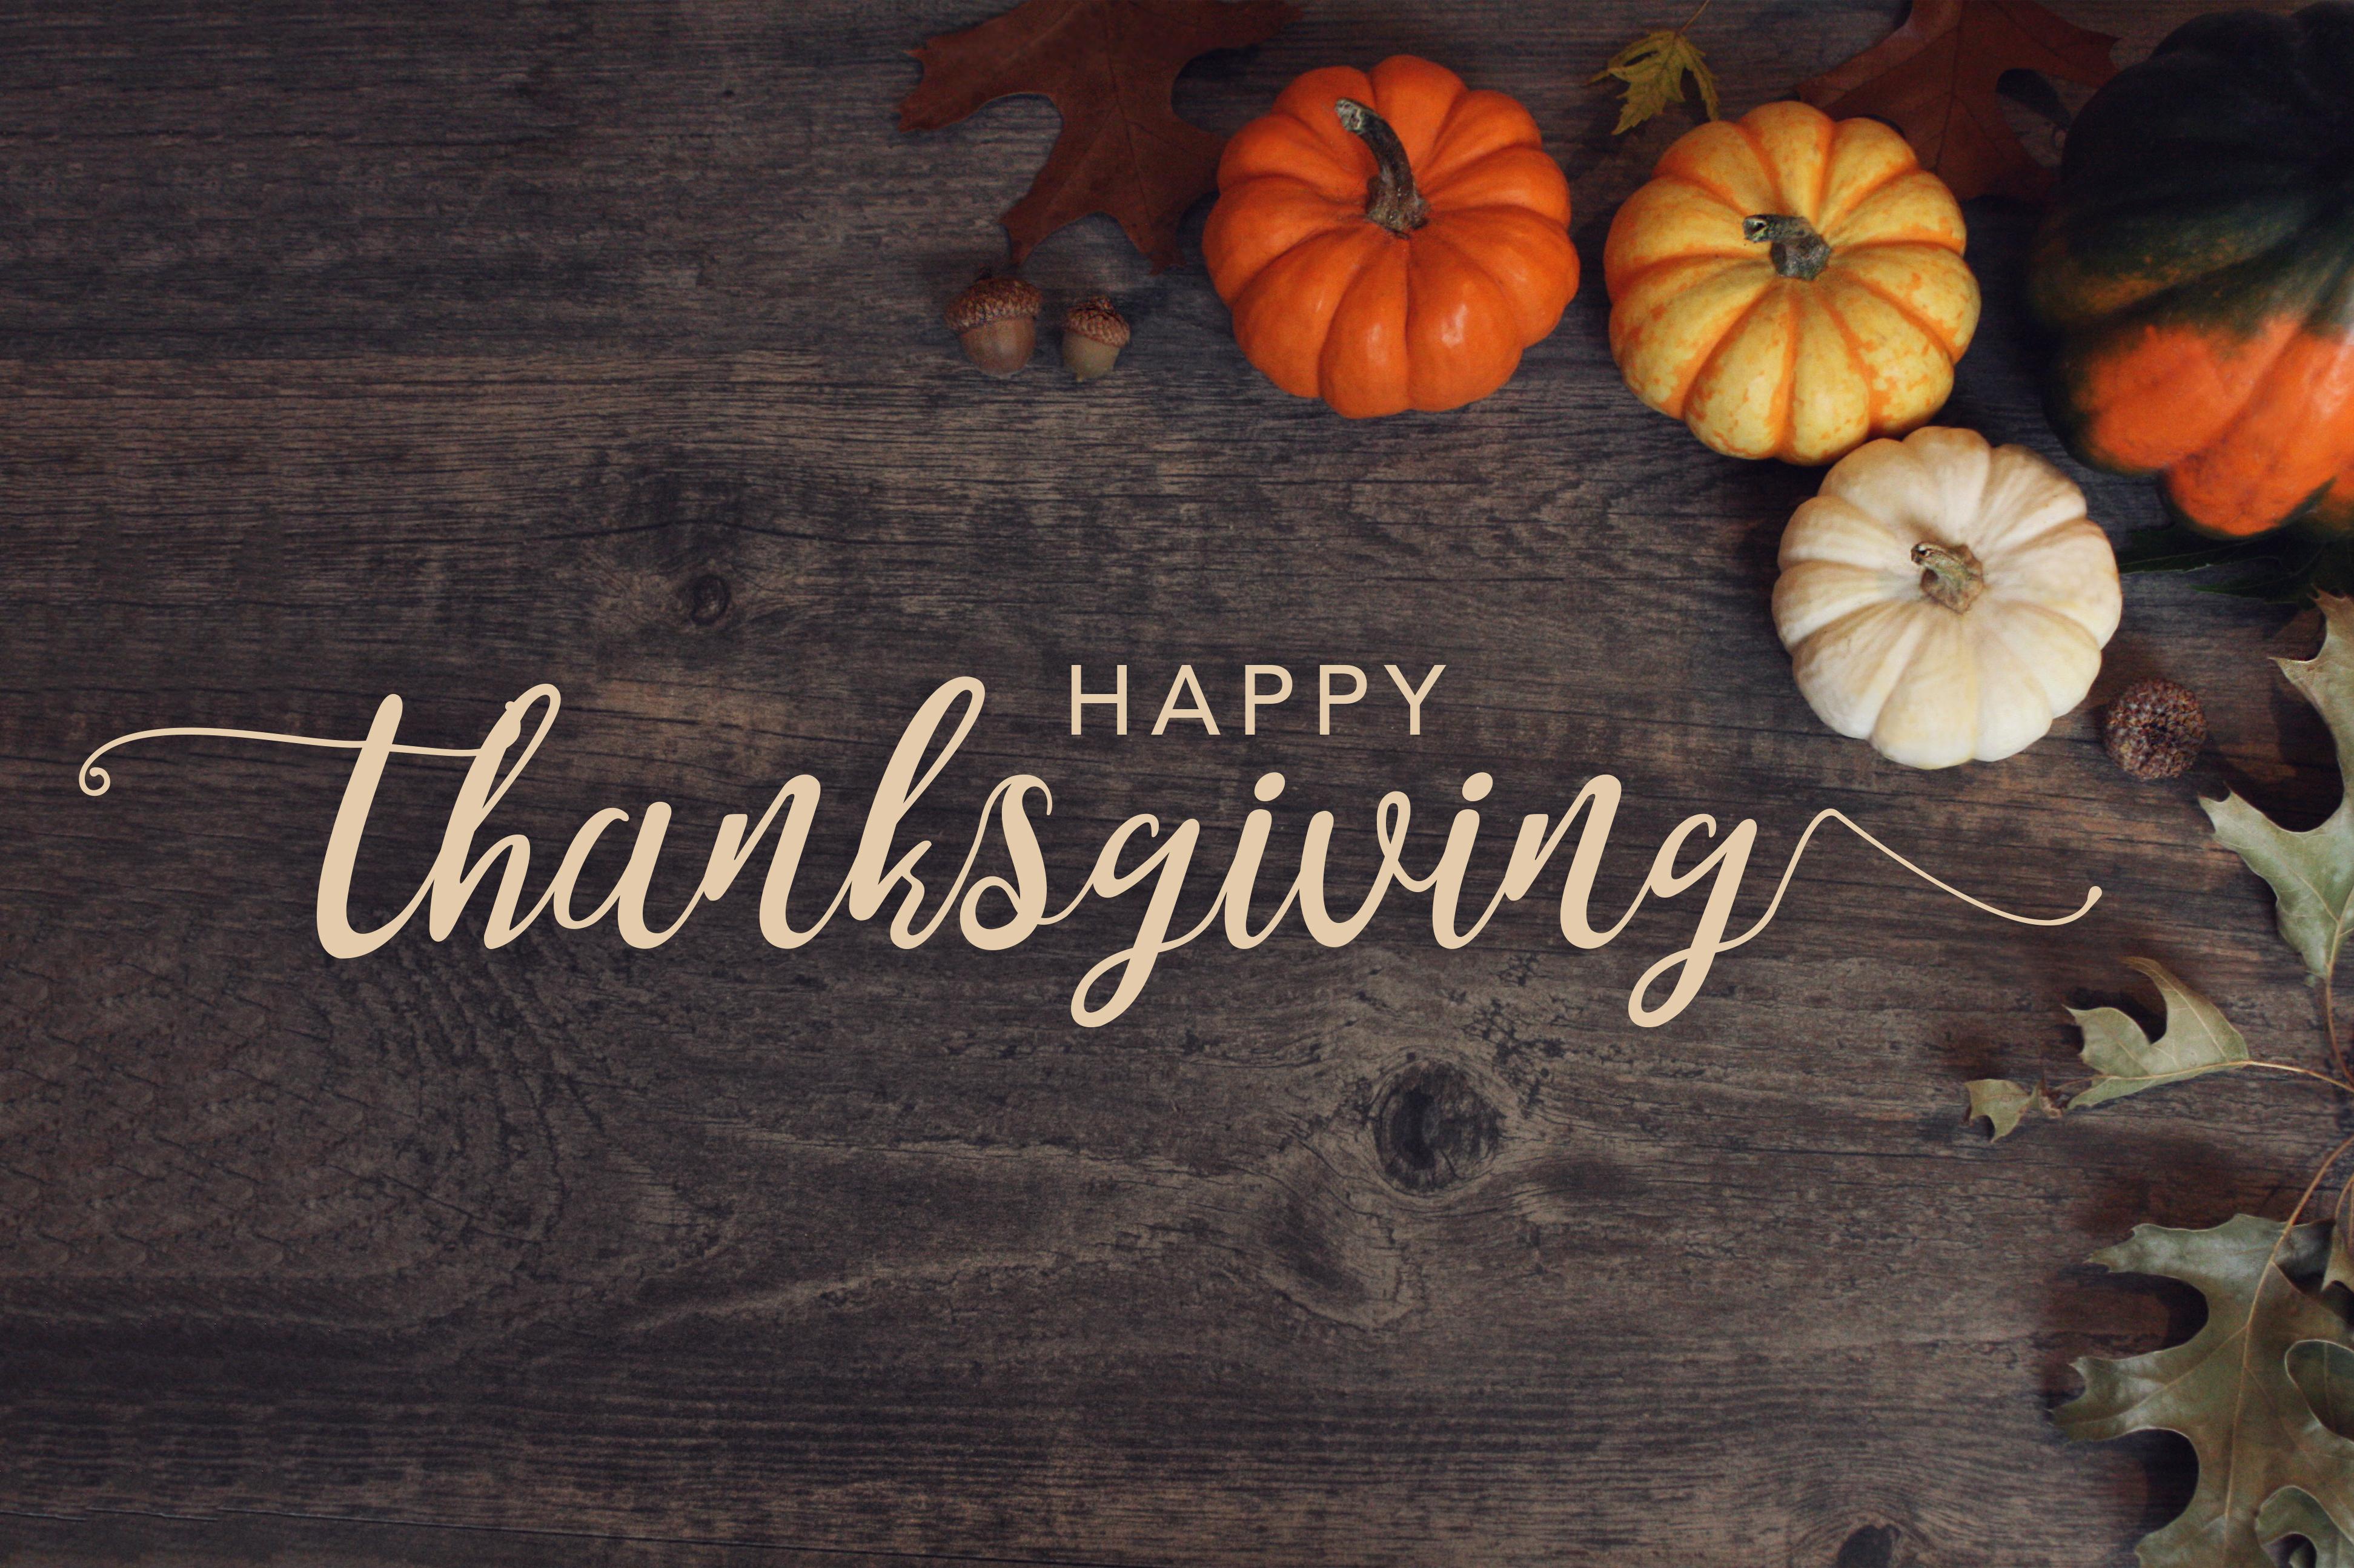 Happy Thanksgiving Image, Picture, Photo, Wallpaper